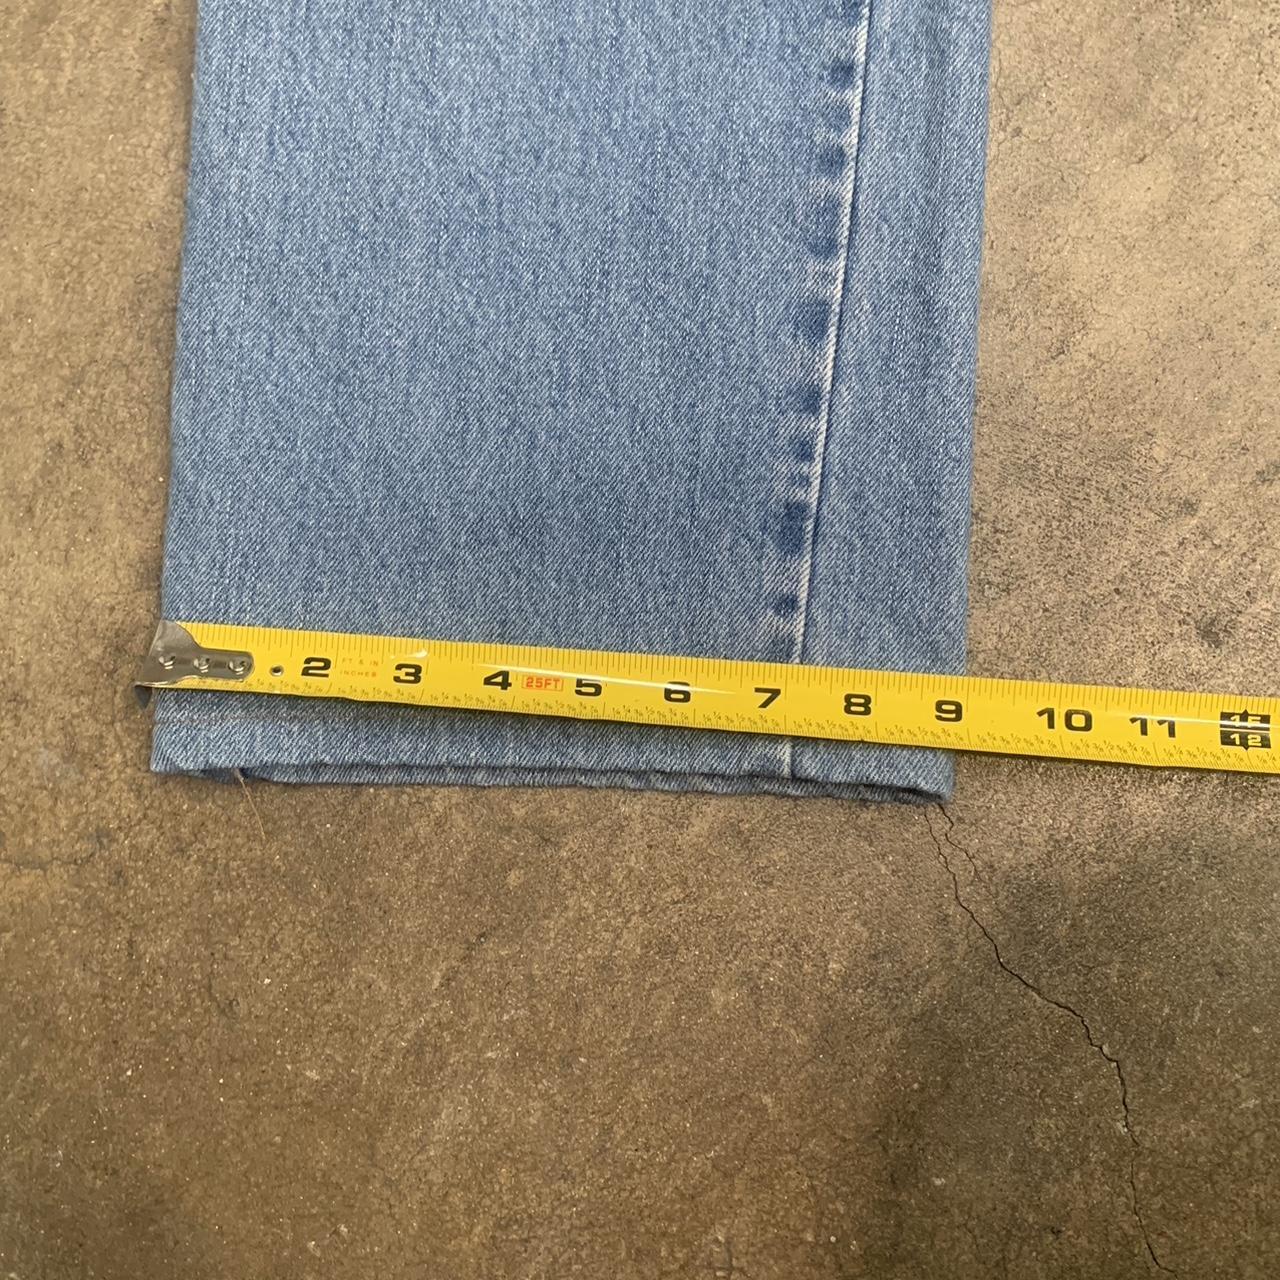 2010 Straight fit 505 Levi’s in good condition Has... - Depop